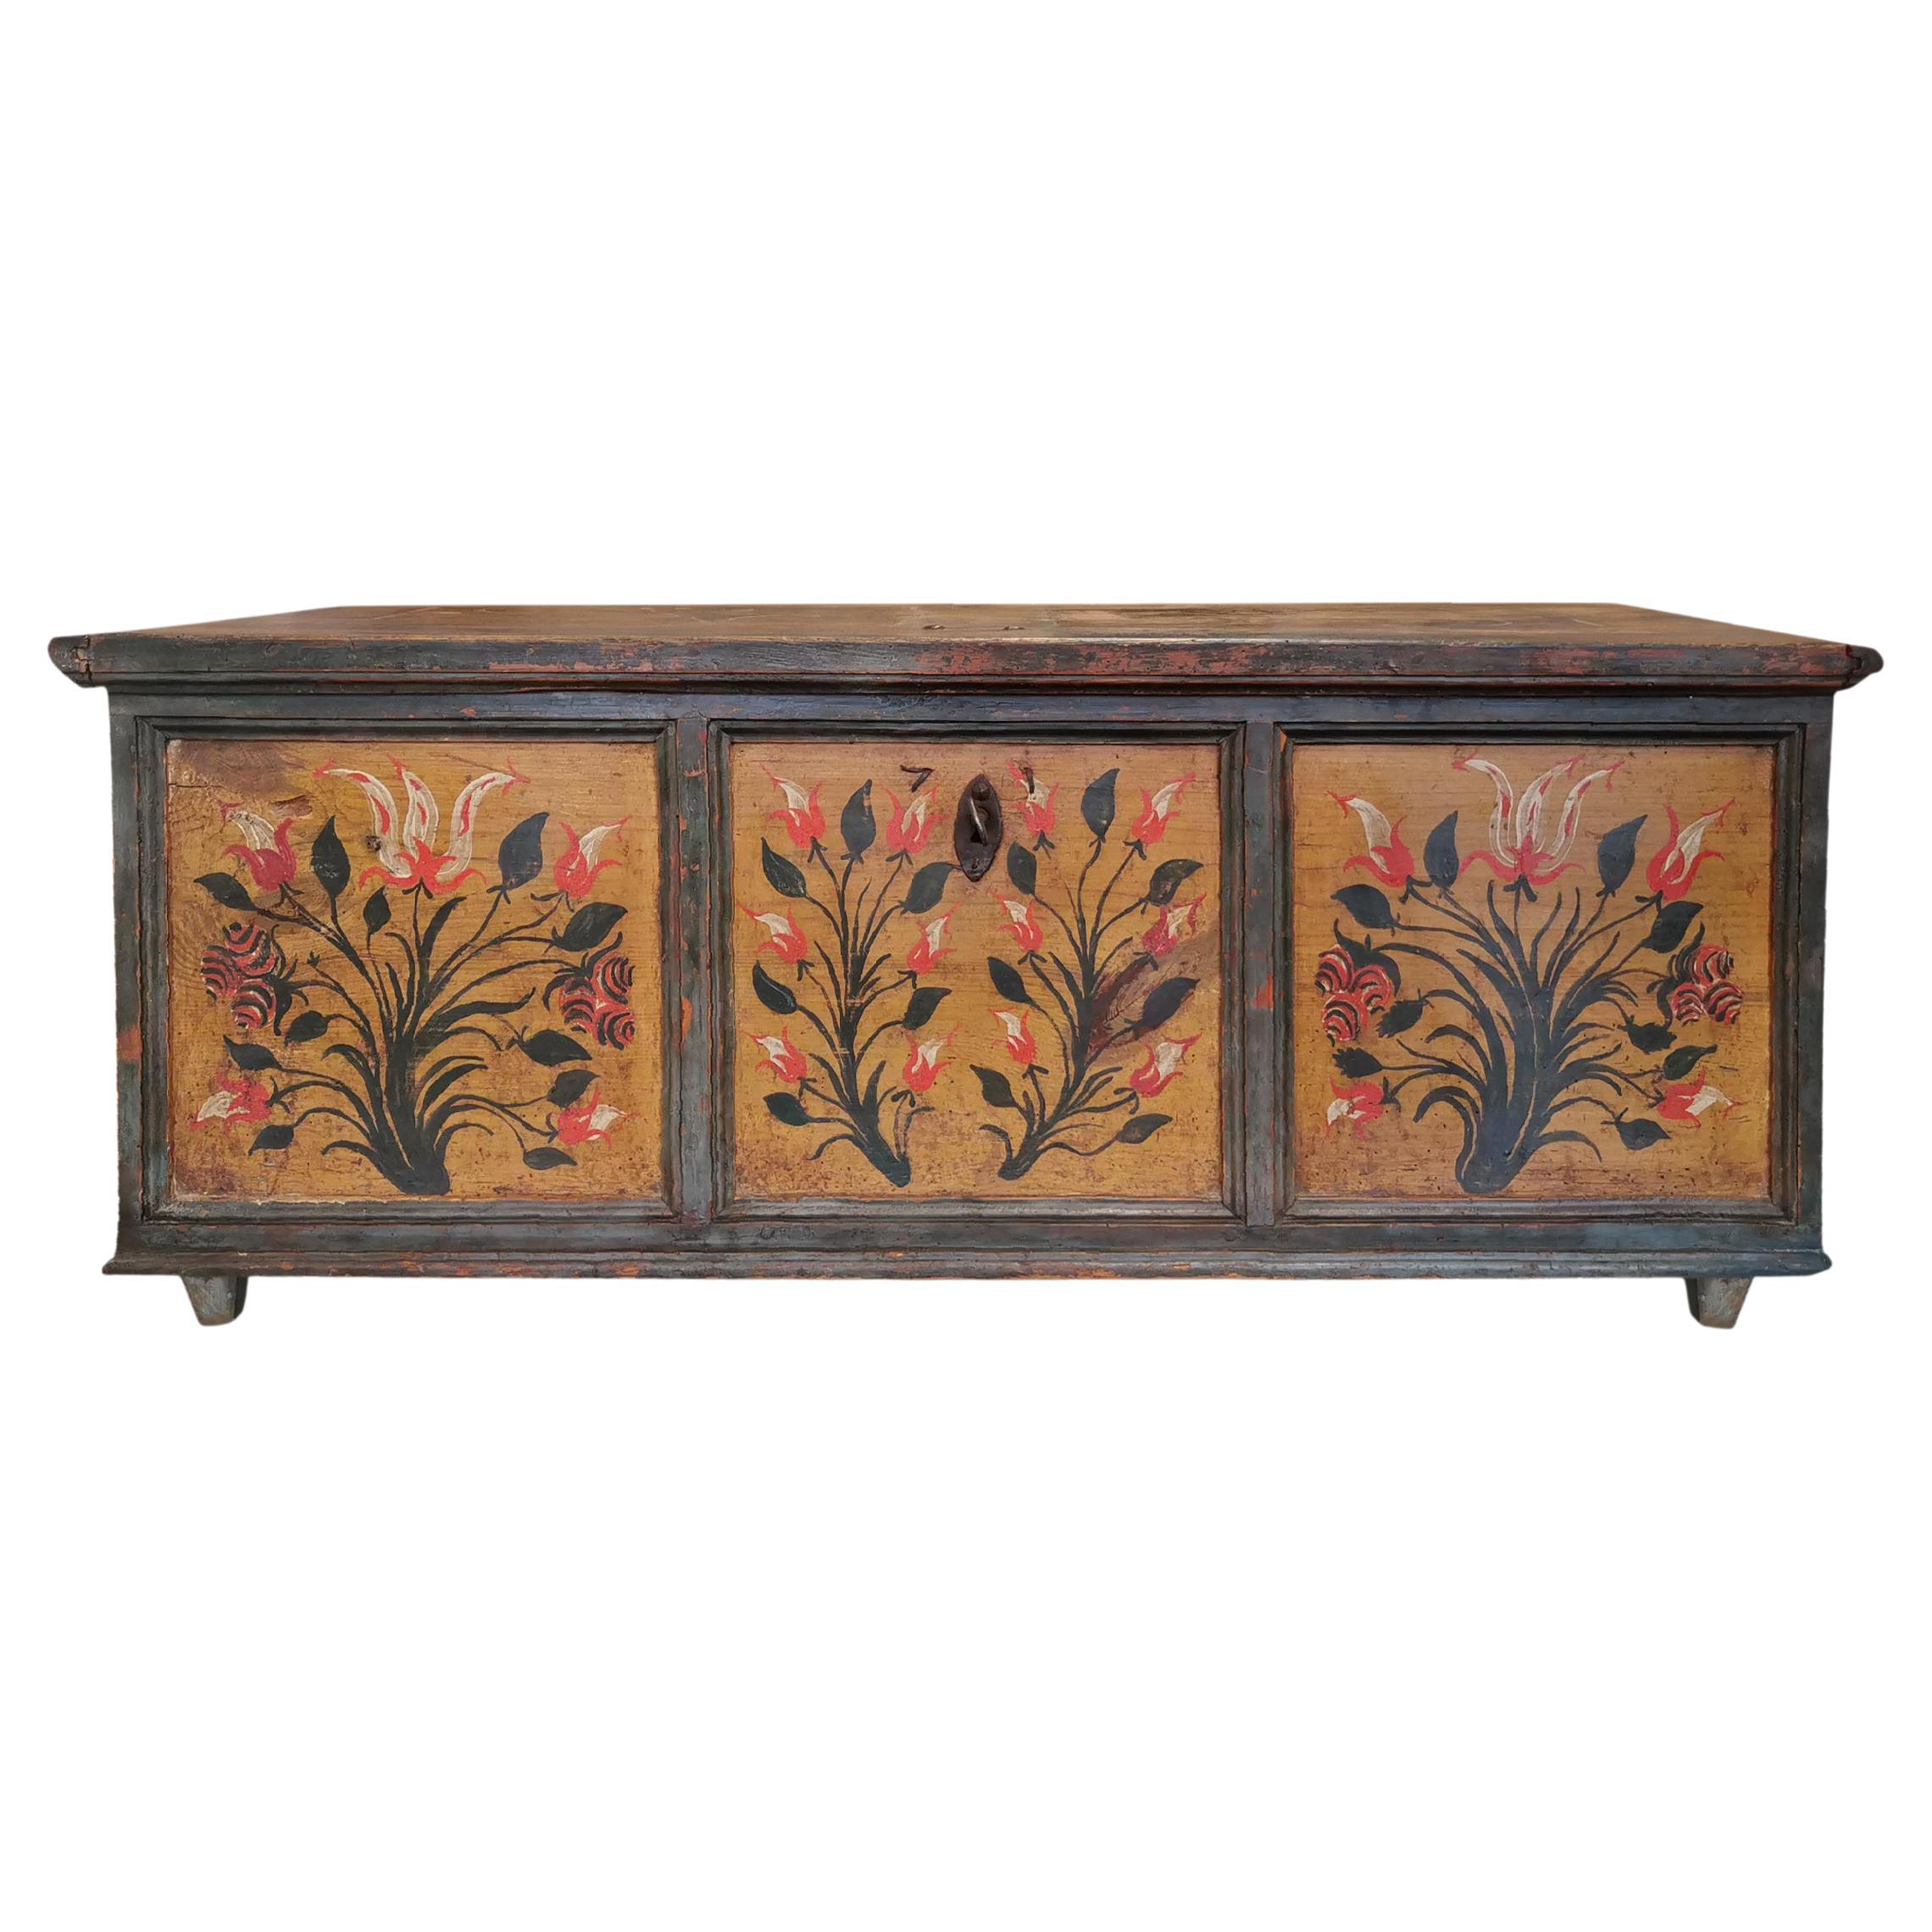 Dark Green Floral Painted Blanket Chest Early 19th Century